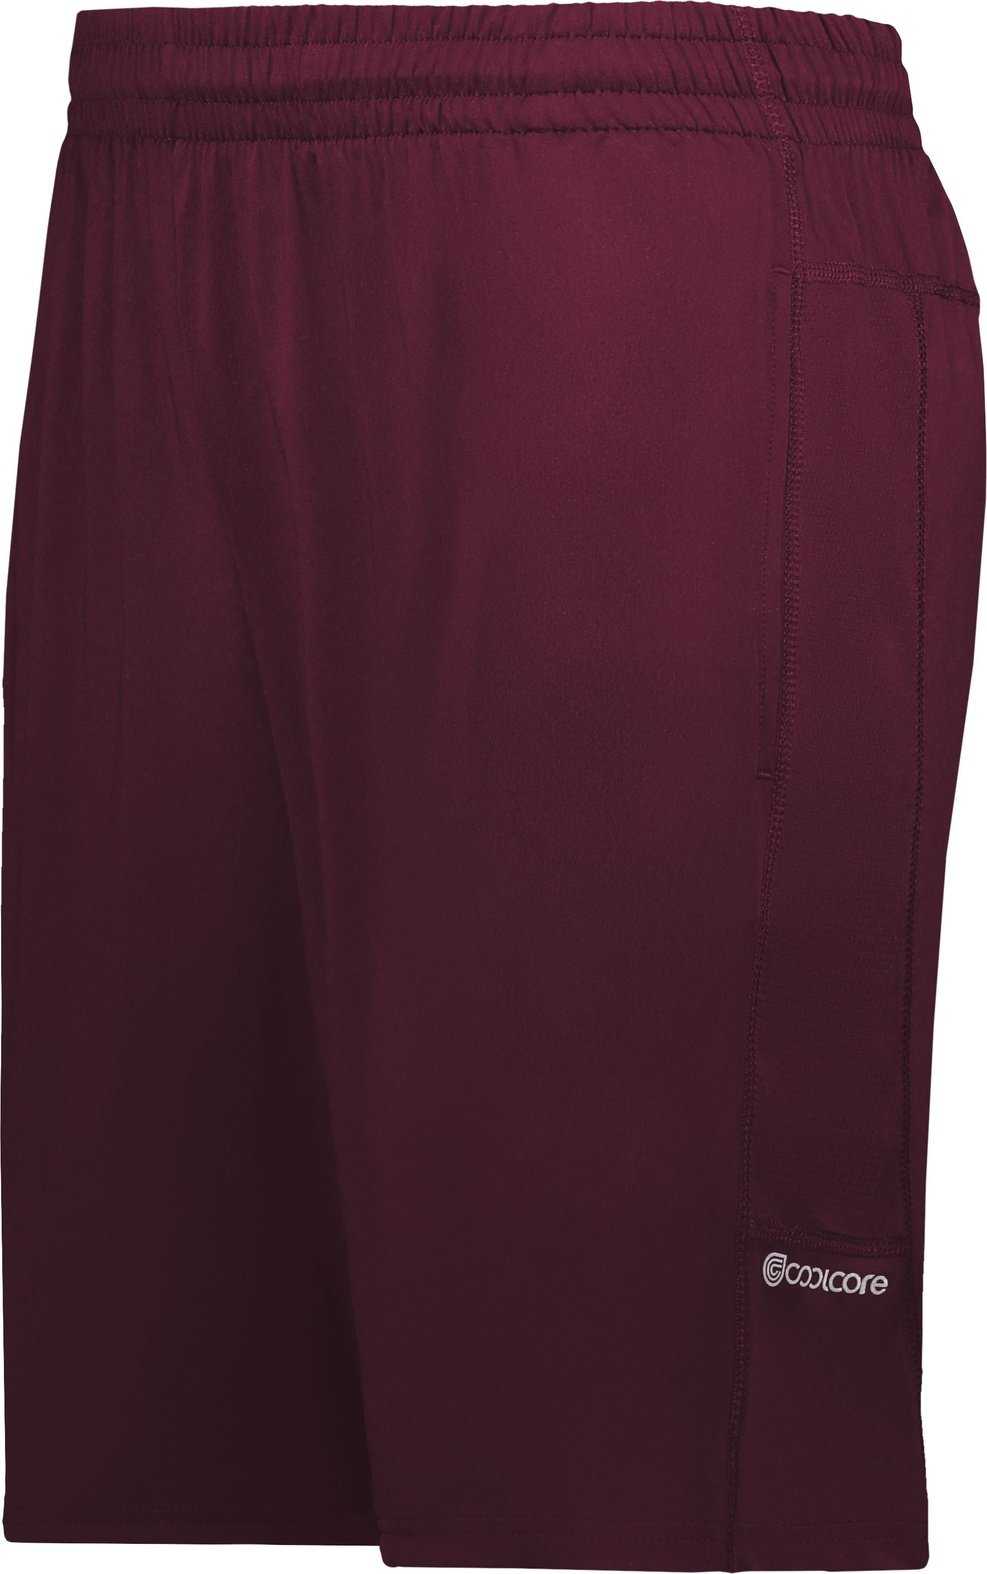 Holloway 222594 Coolcore Shorts - Maroon - HIT a Double